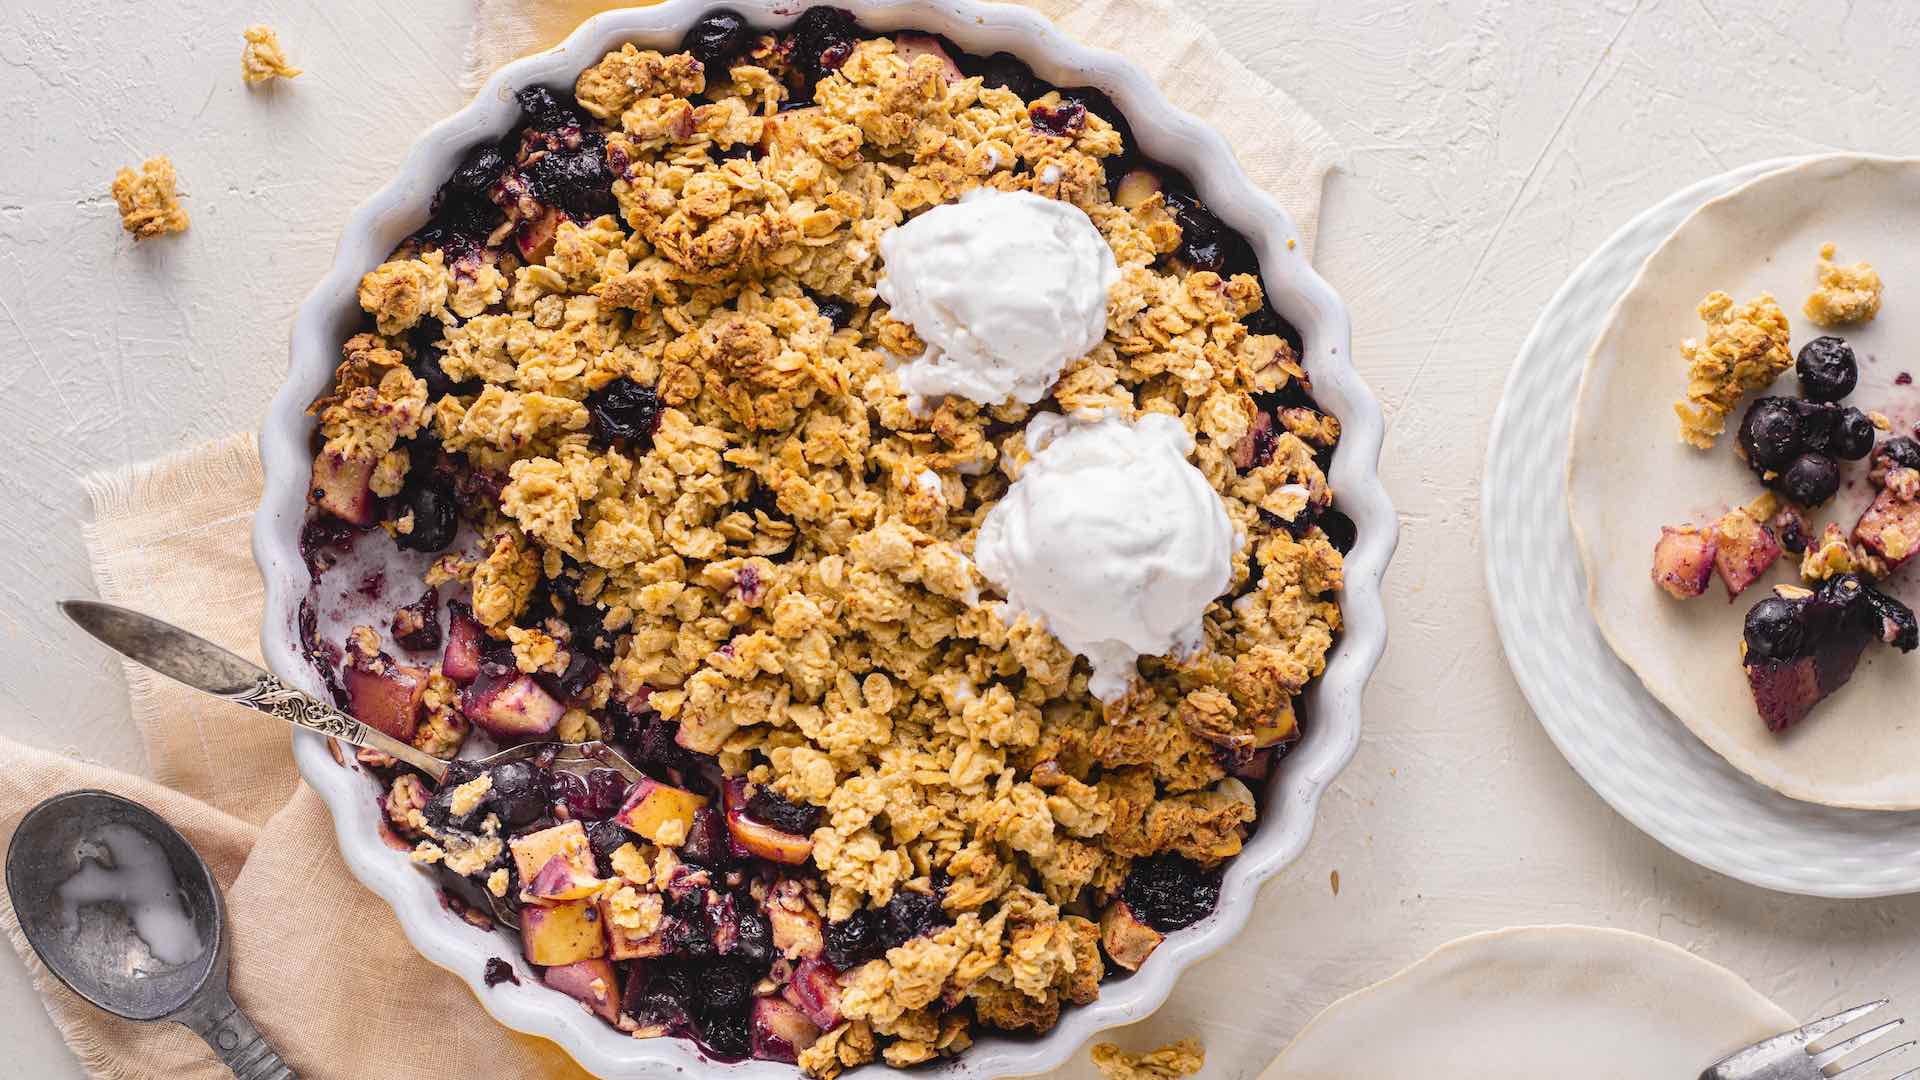 Apple blueberry crumble